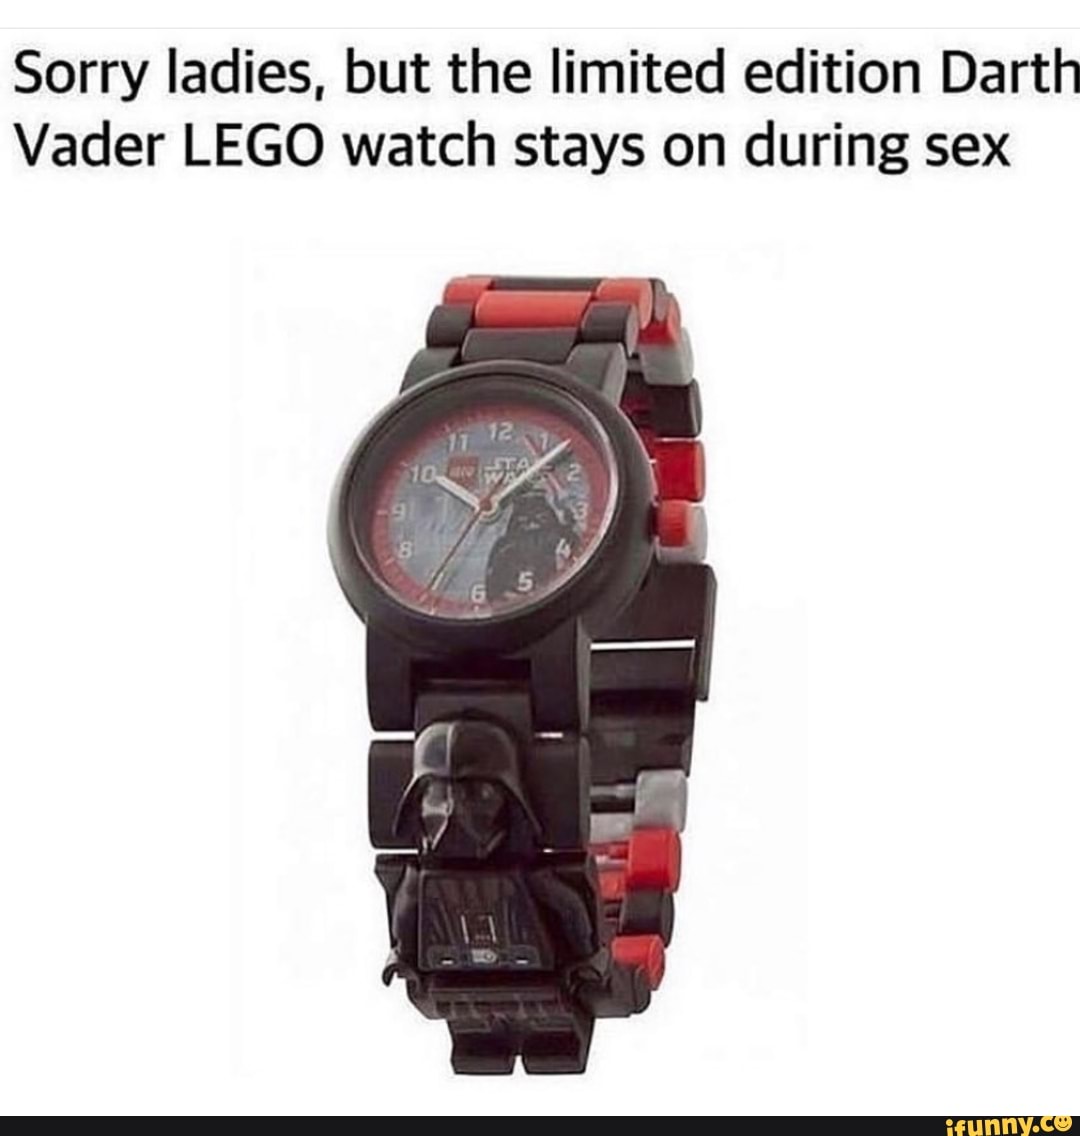 Sorry Ladies But The Limited Edition Darth Vader Lego Watch Stays On